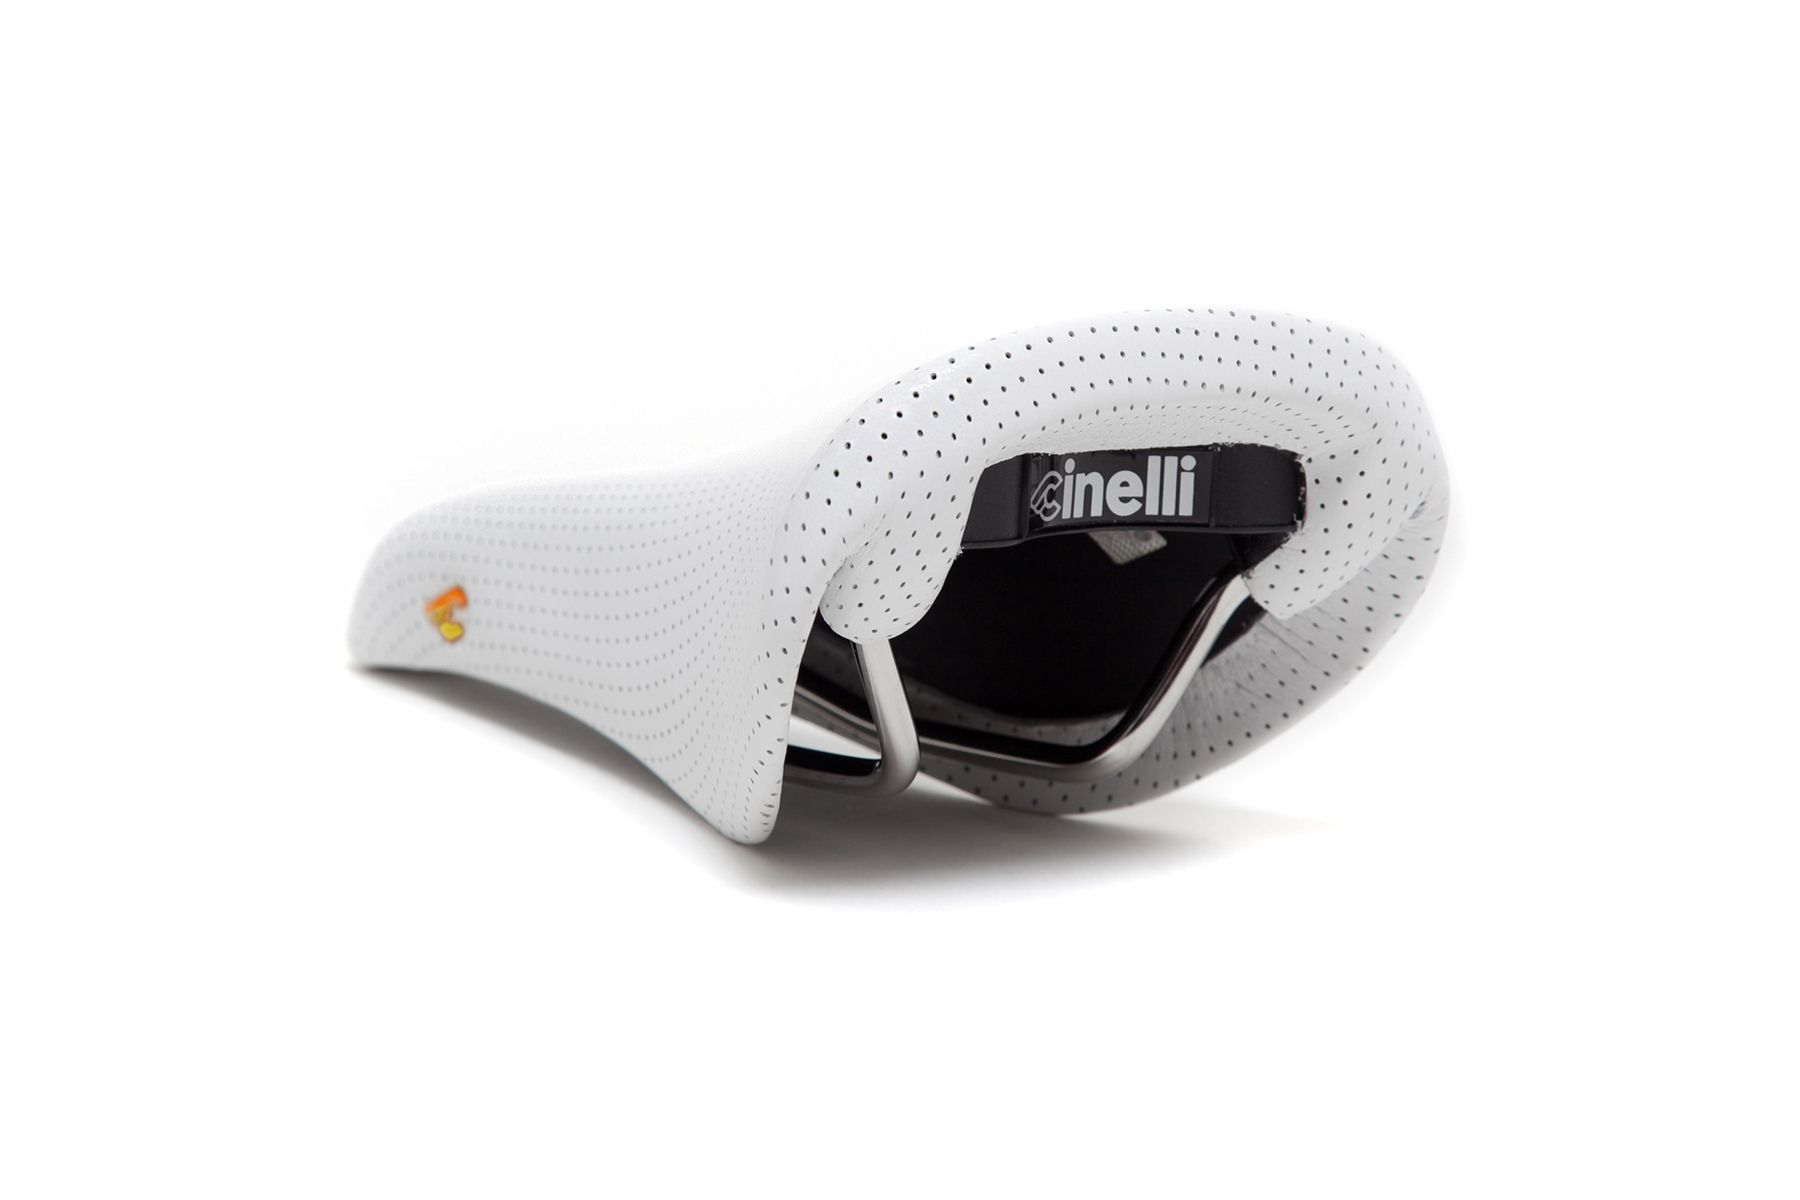 Cinelli Volare Saddle is available on Cicli Corsa Web Site